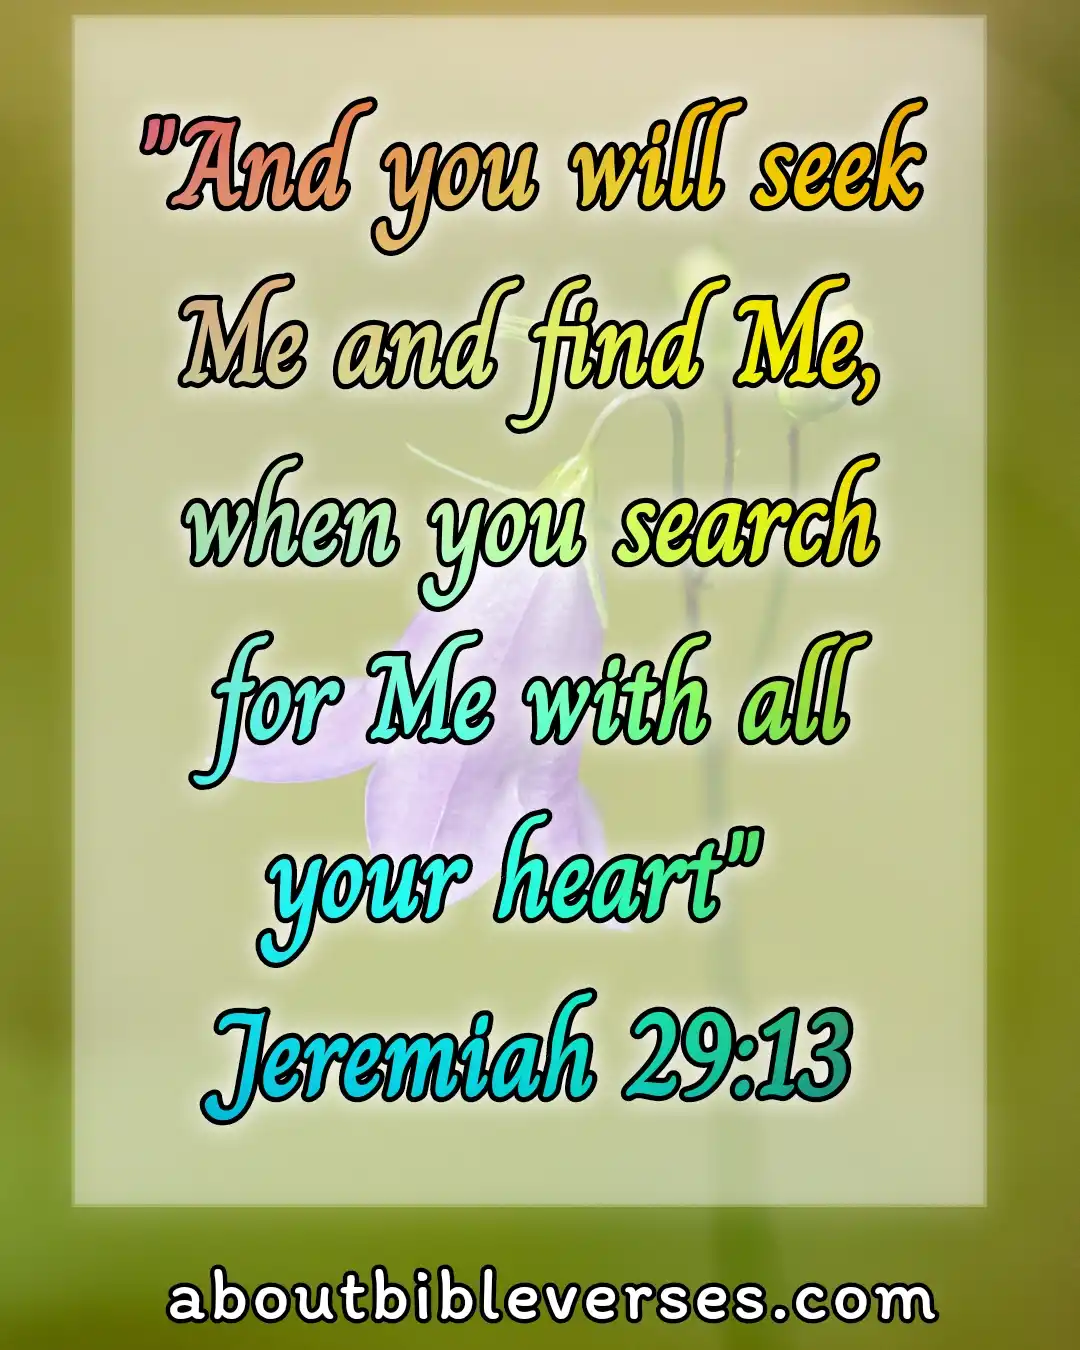 bible verses about your soul and heart (Jeremiah 29:13)